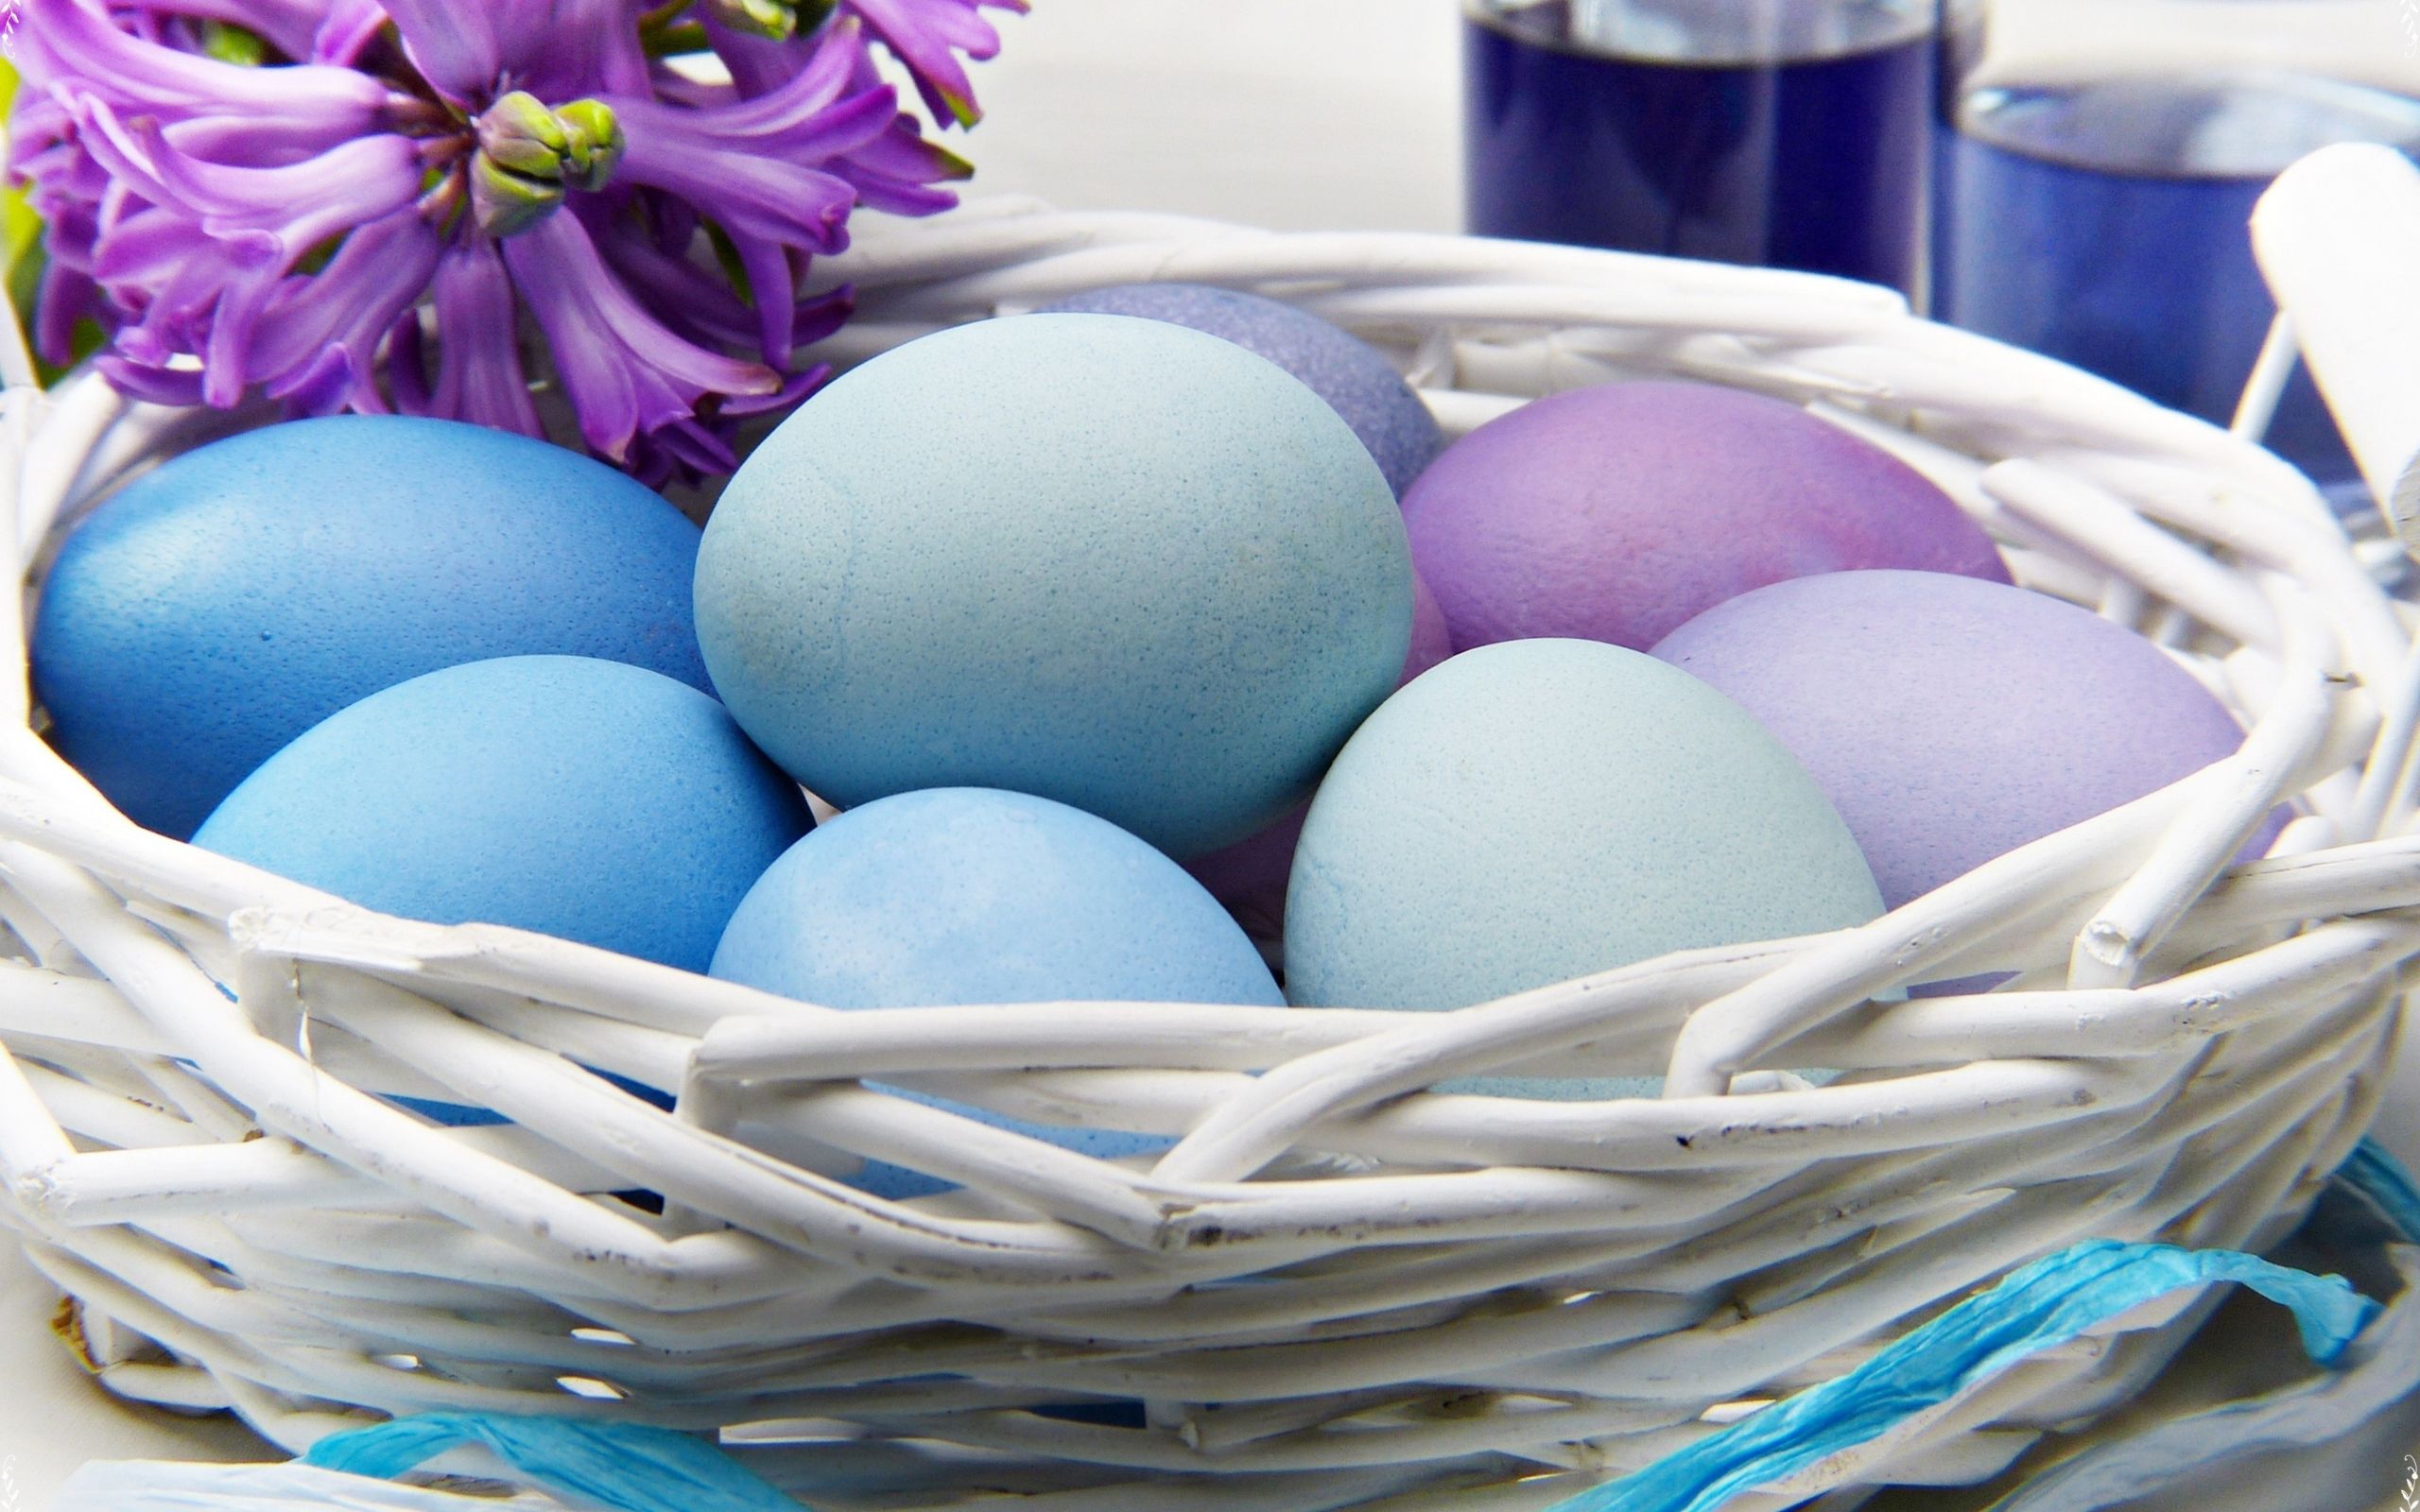 Download 2560x1600 wallpaper easter, eggs, colored, nest, close up, dual wide, widescreen 16: widescreen, 2560x1600 HD image, background, 3083